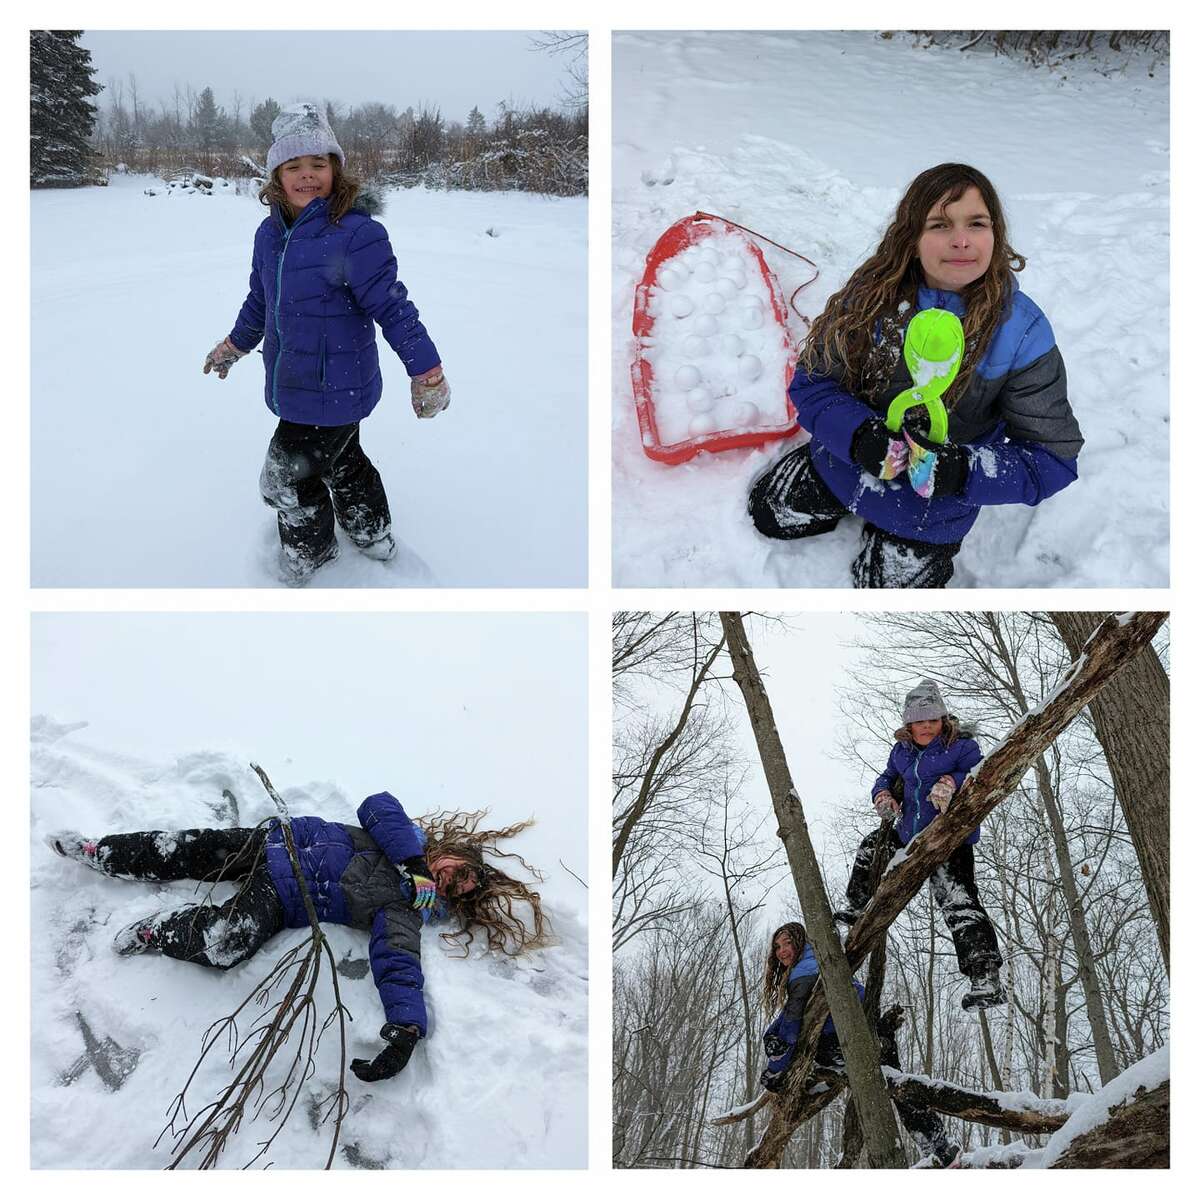 Danielle Liphard shared photos from Wednesday's snowfall, as most Midland area children had the day off of school due to weather conditions.  